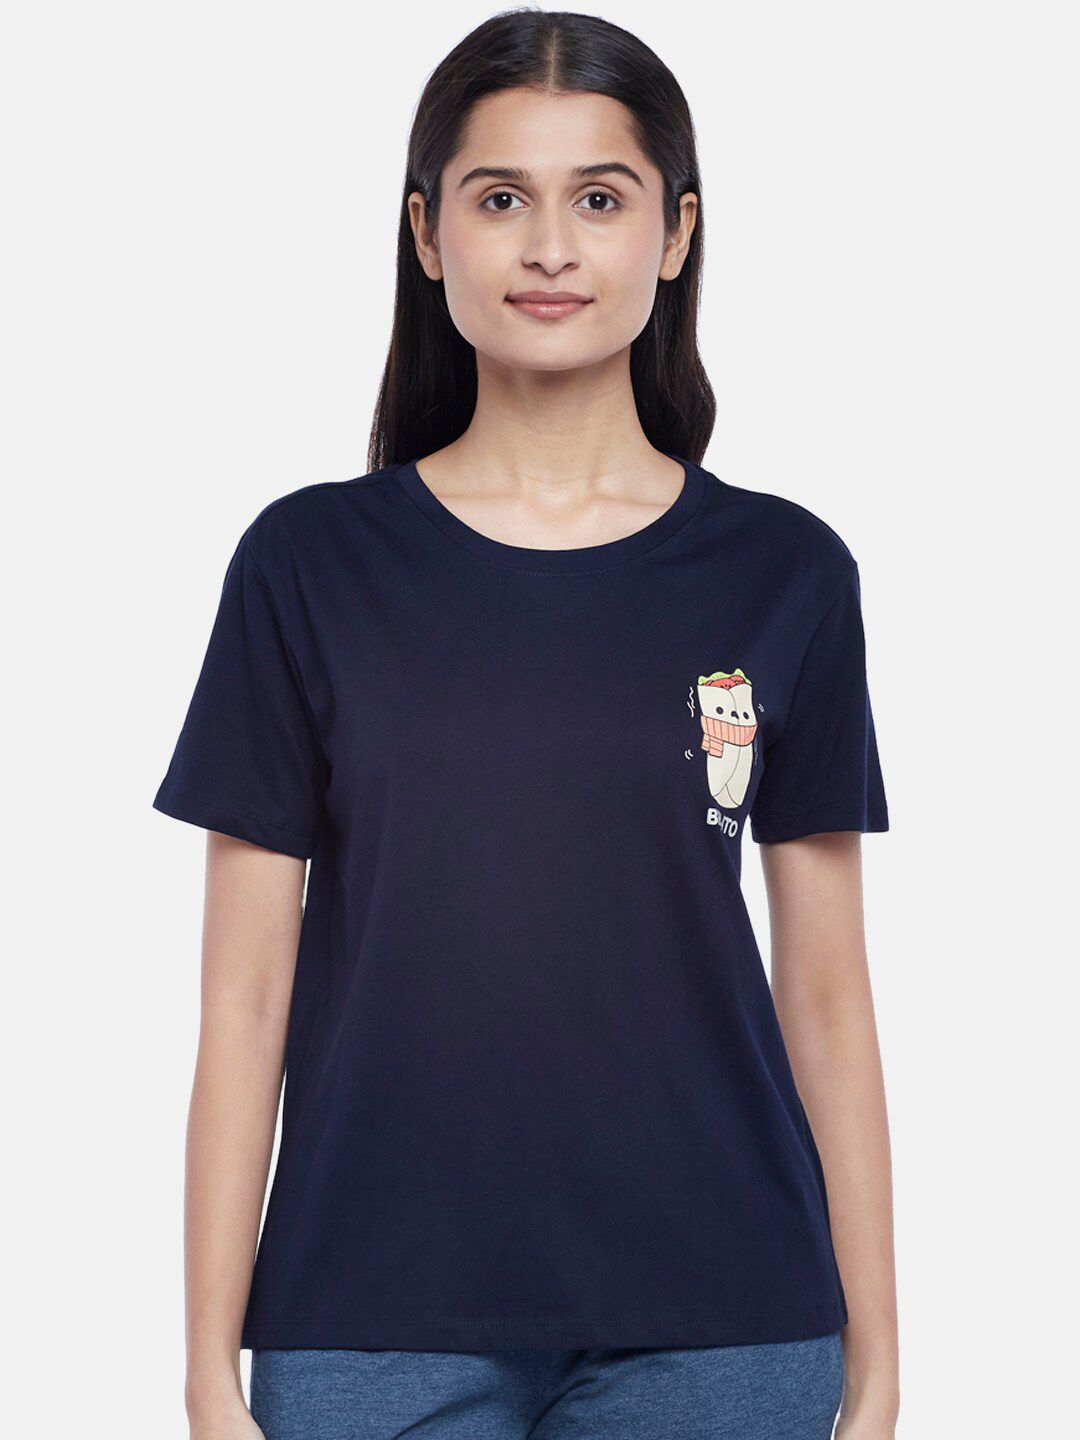 Dreamz by Pantaloons Navy Blue Pure Cotton Lounge tshirt Price in India